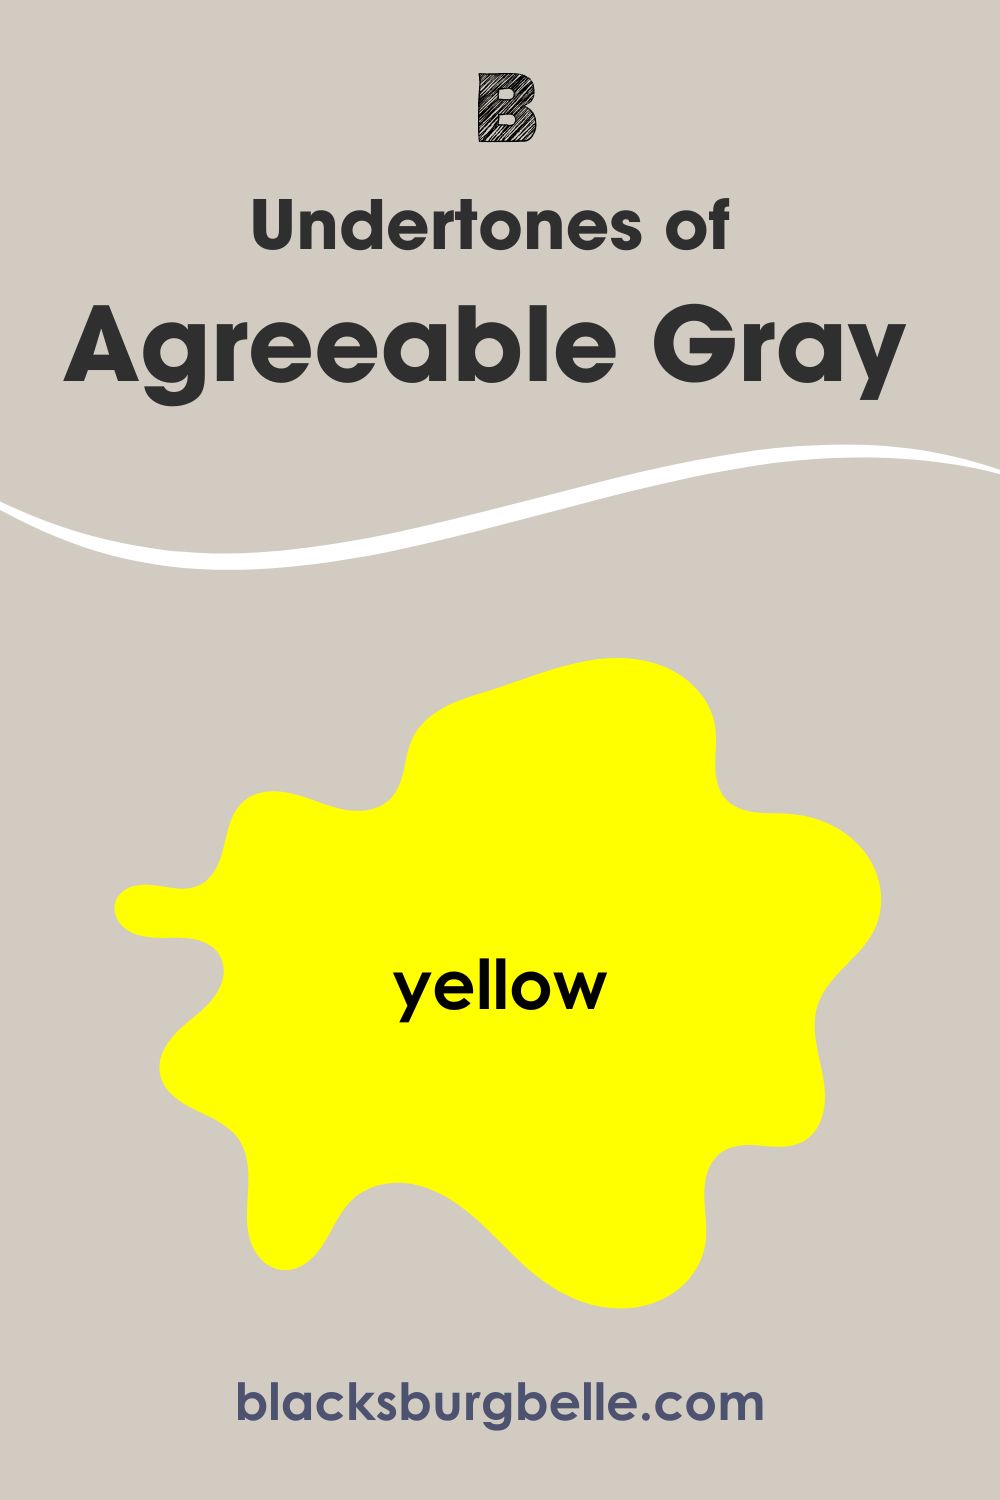 Agreeable Gray